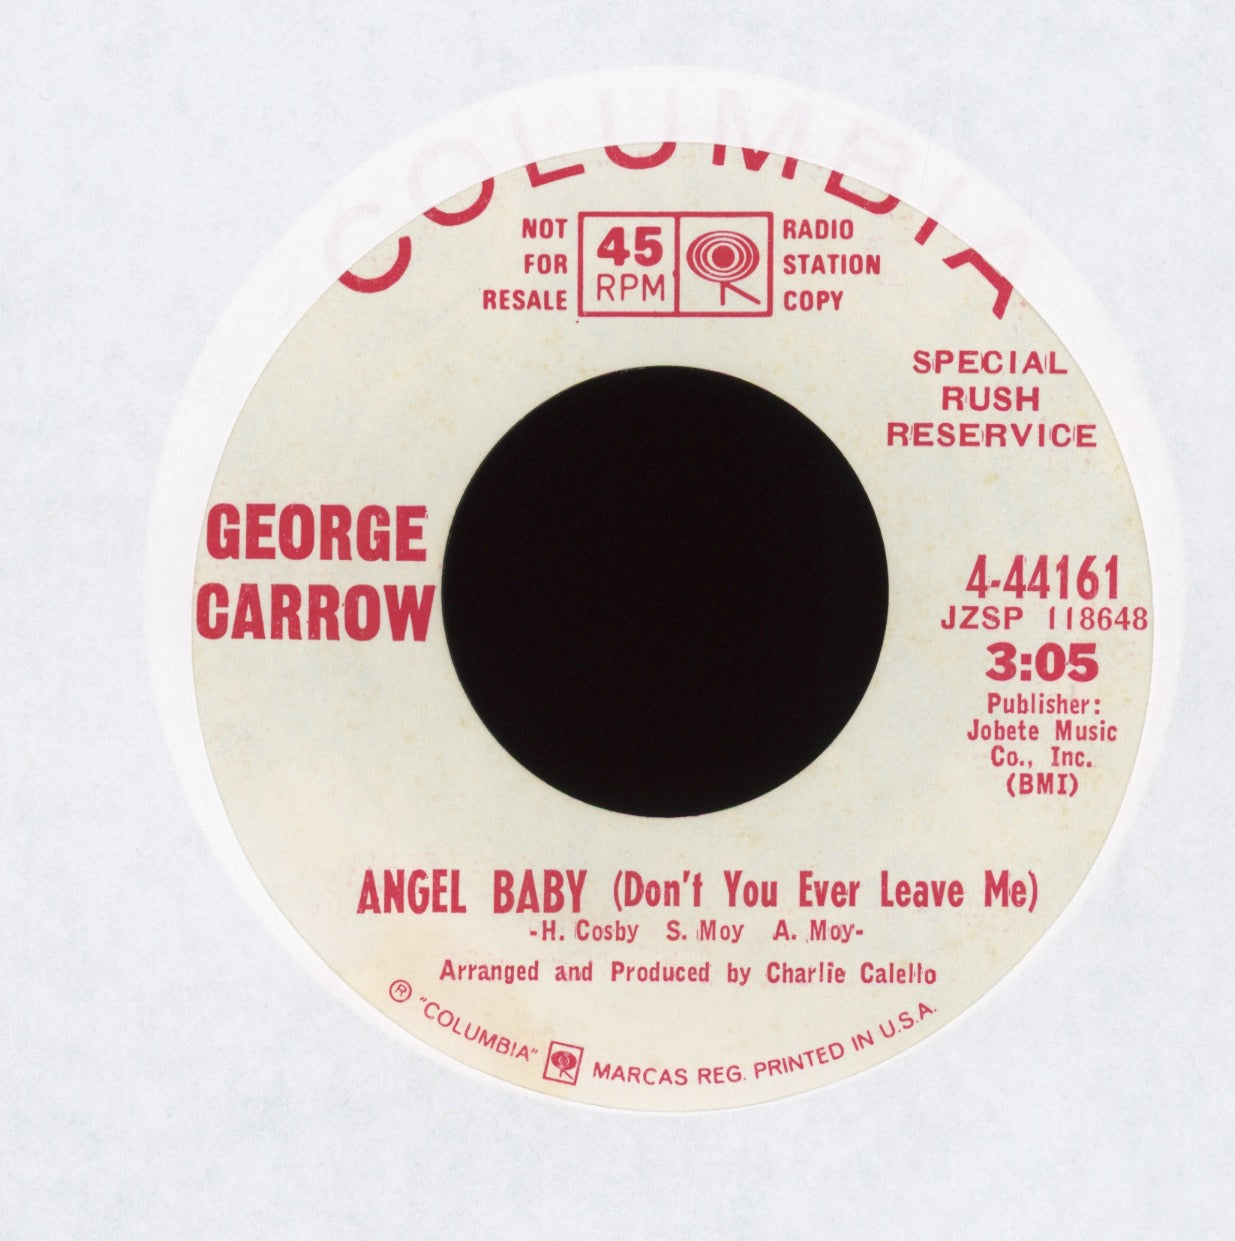 George Carrow - Angel Baby (Don't You Ever Leave Me) on Columbia Promo Northern Soul 45